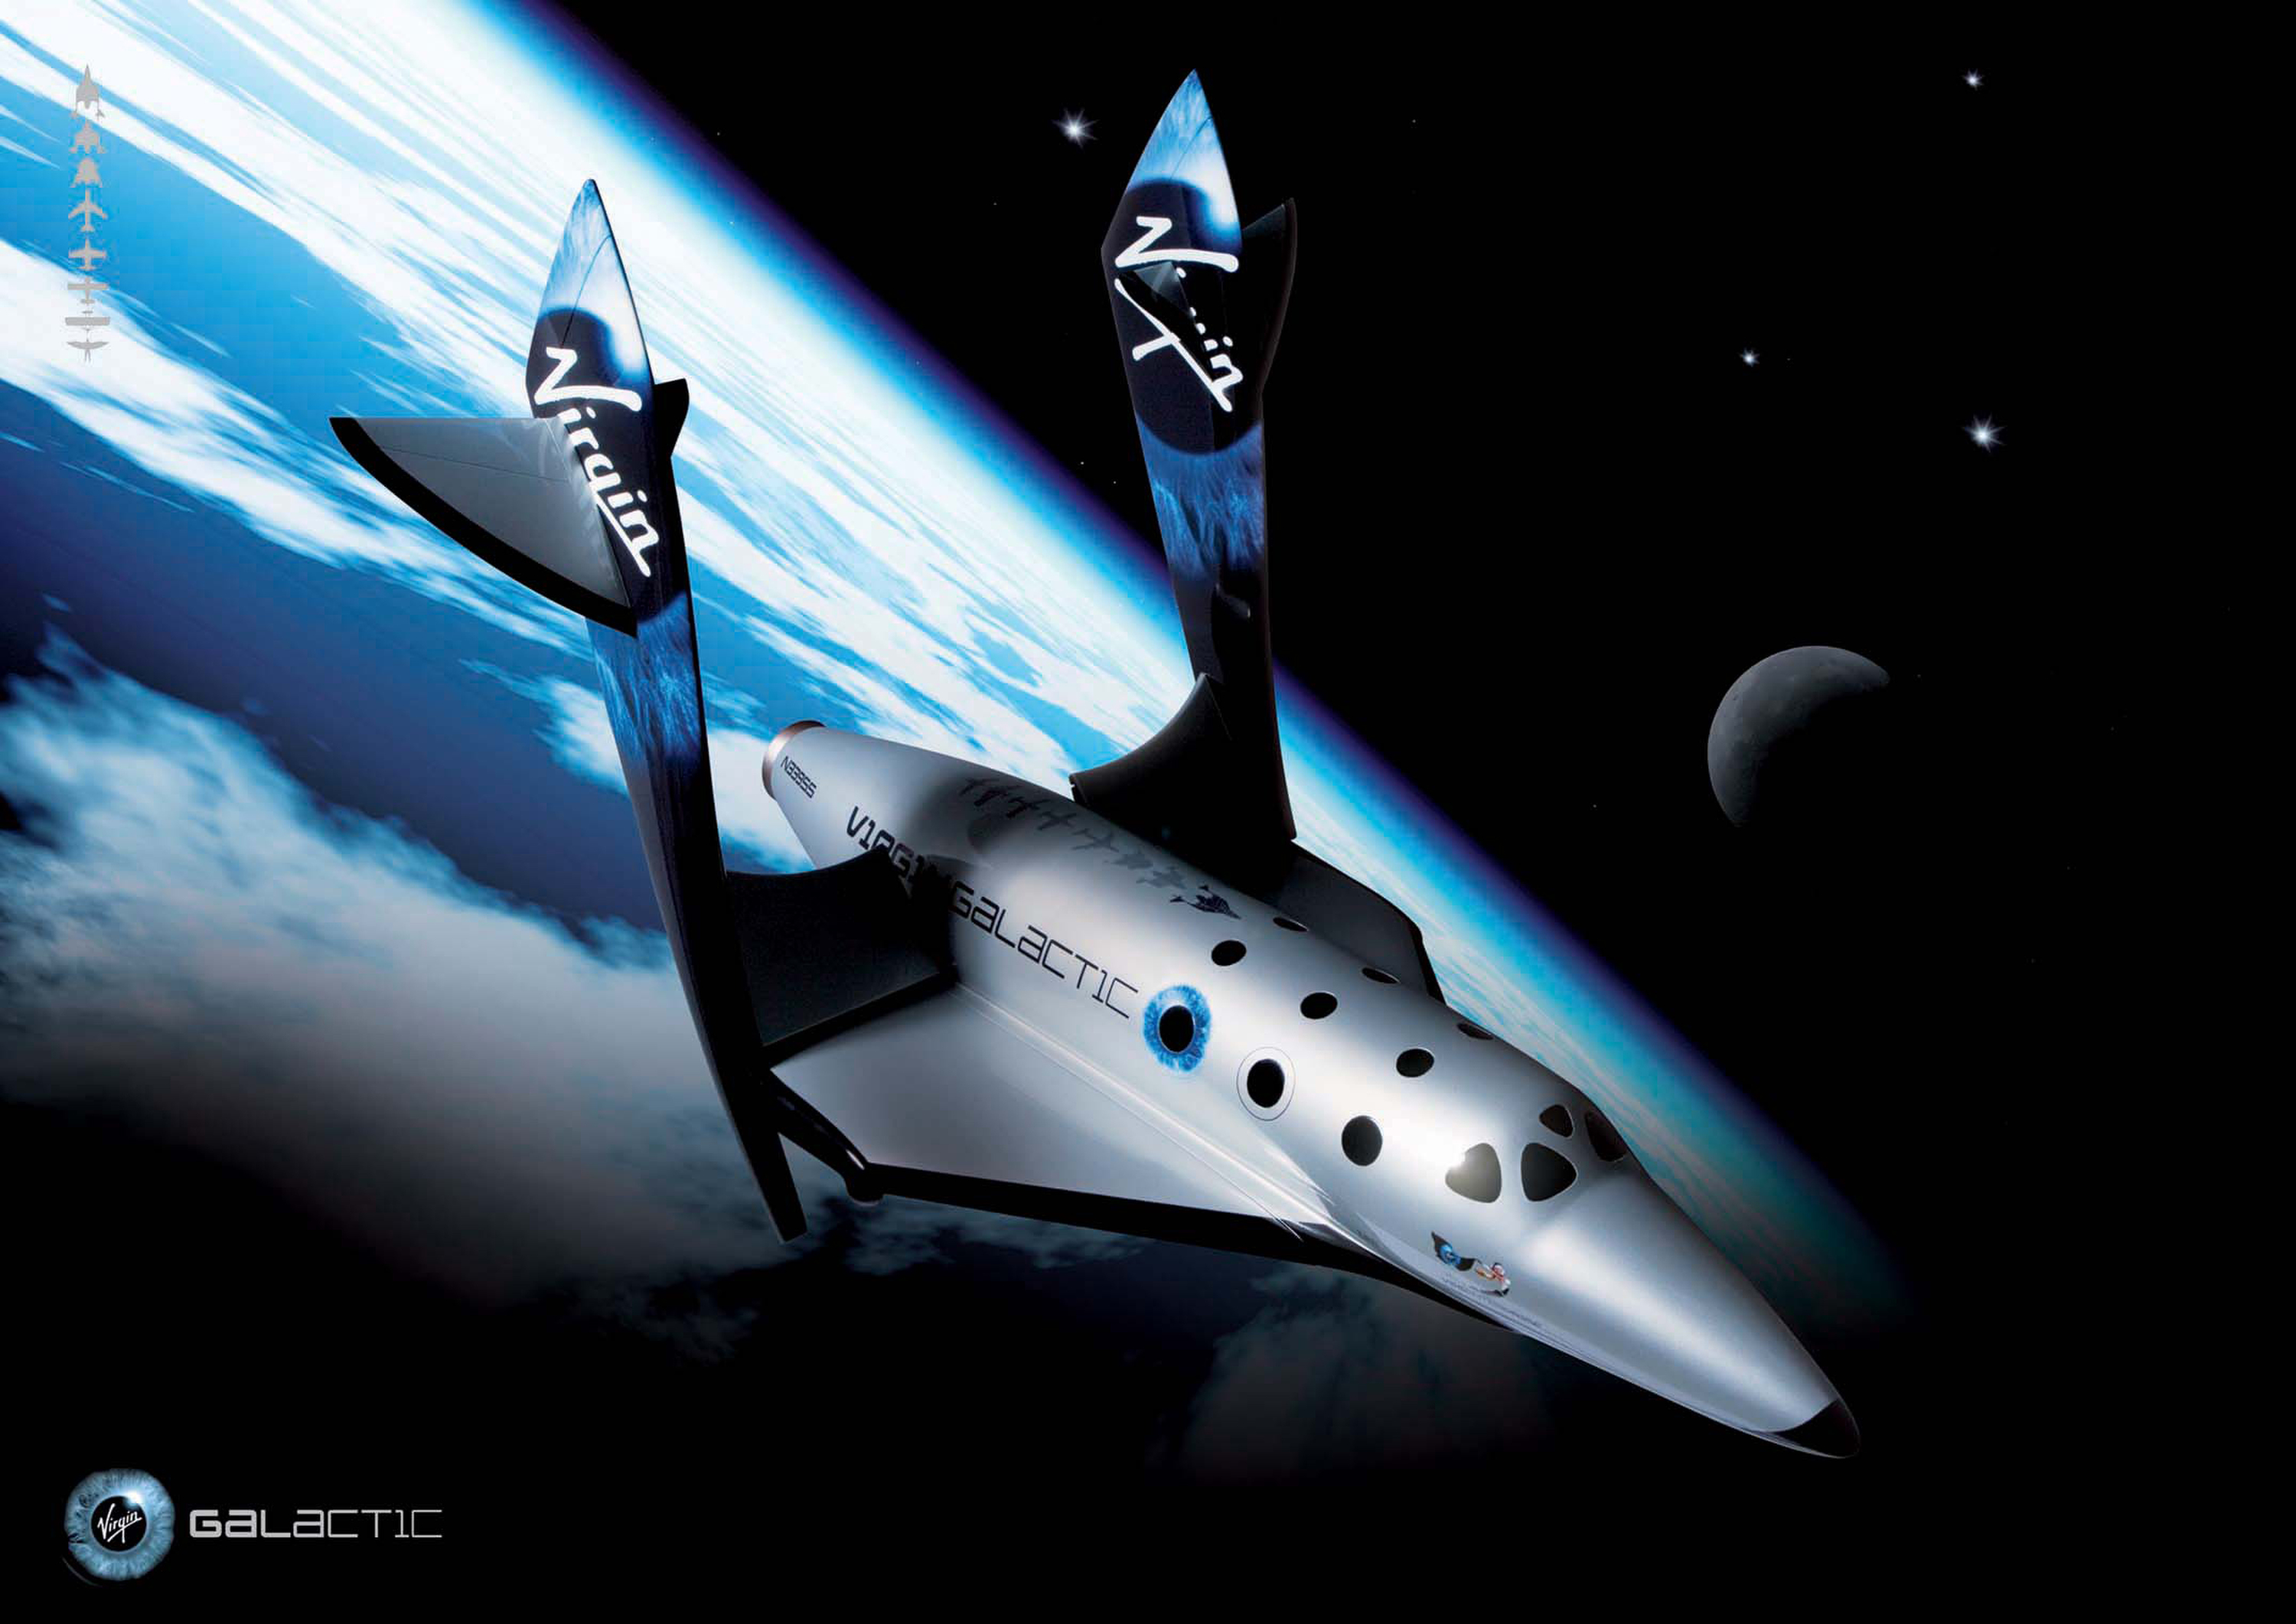 space tourism projects